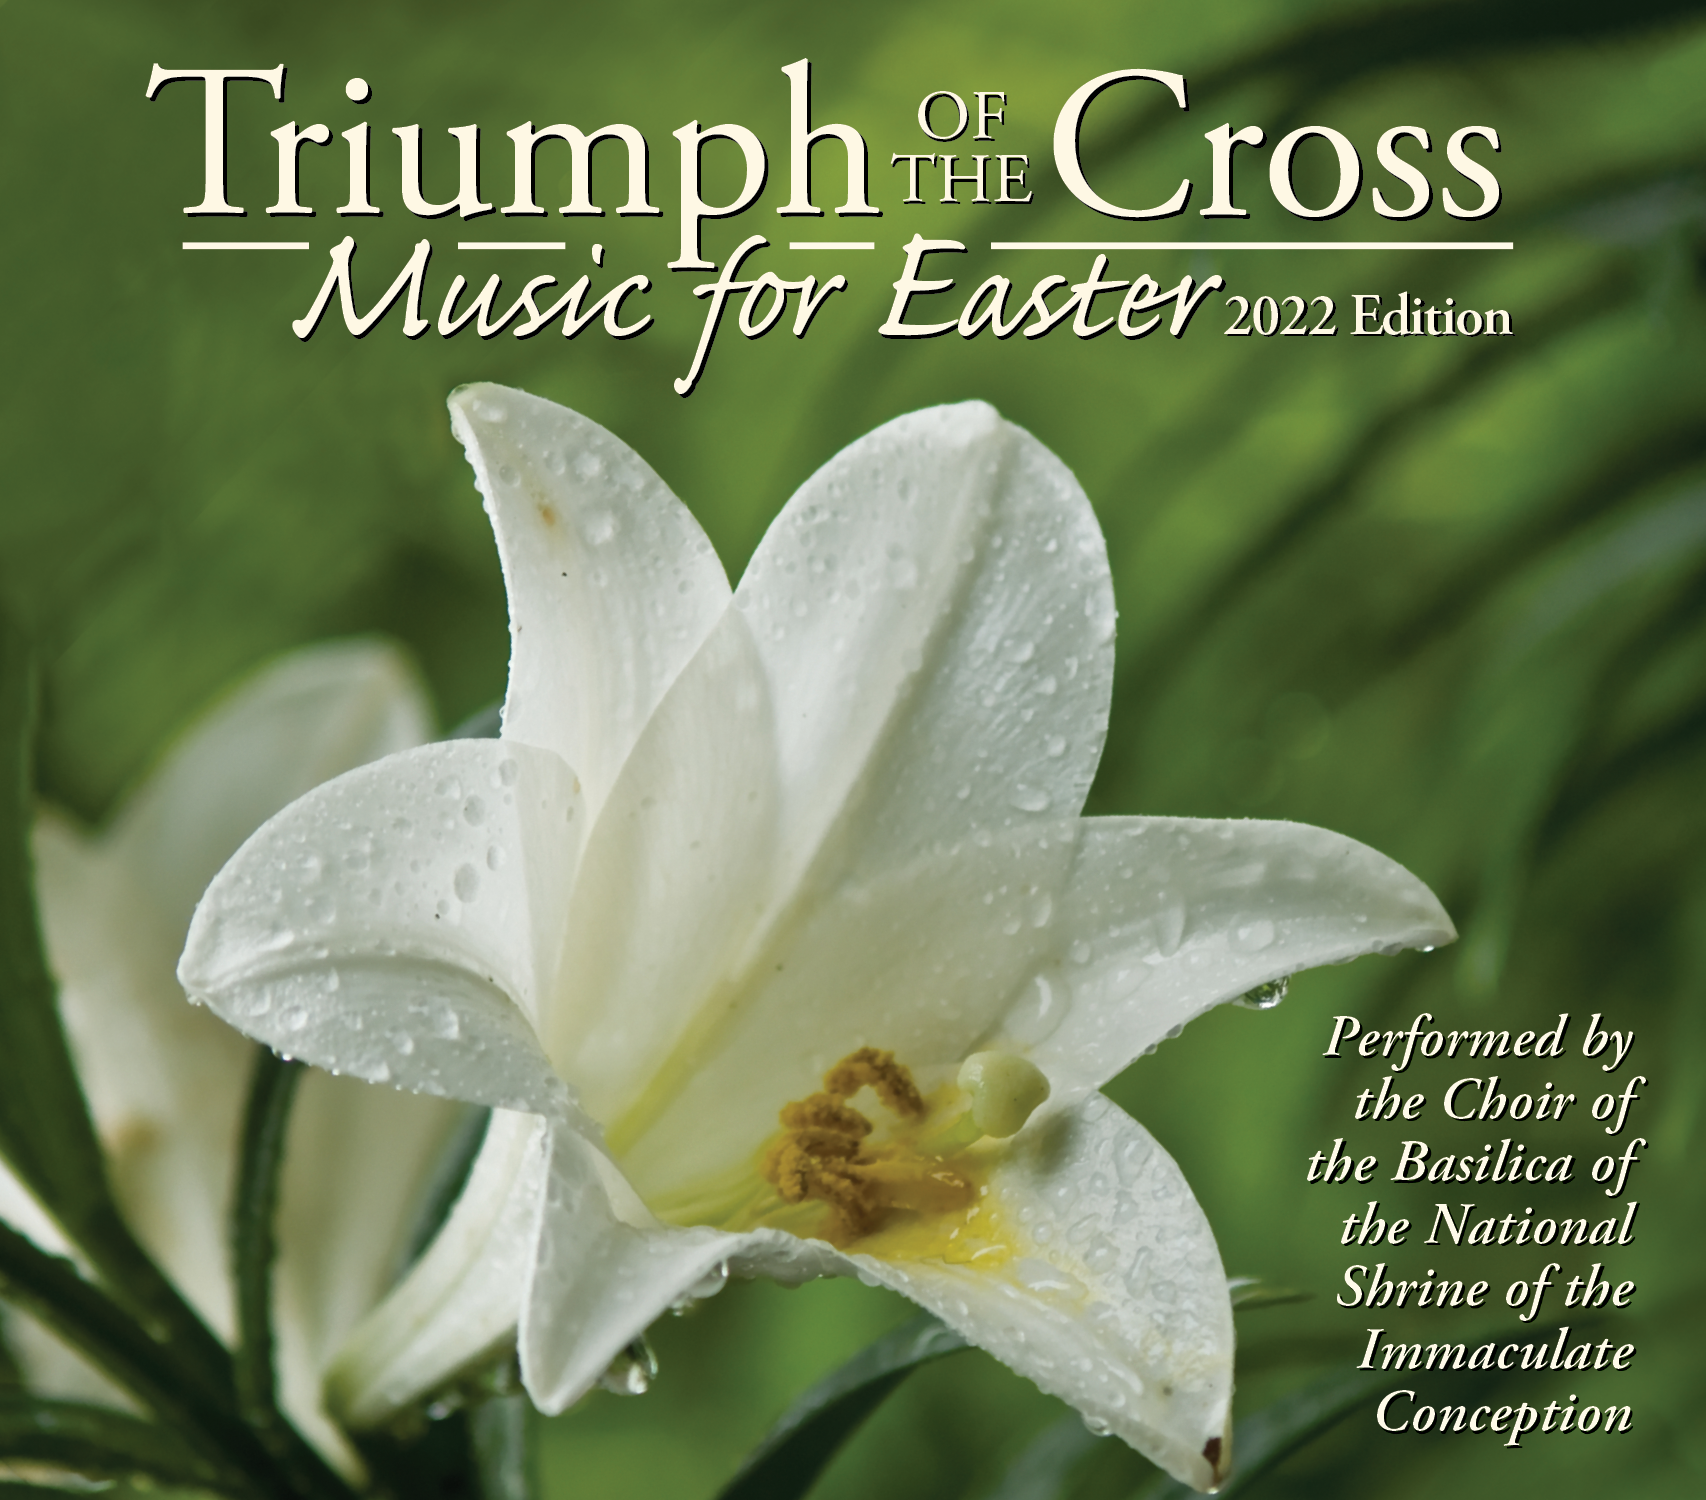 2022 Easter CD Cover and Song List